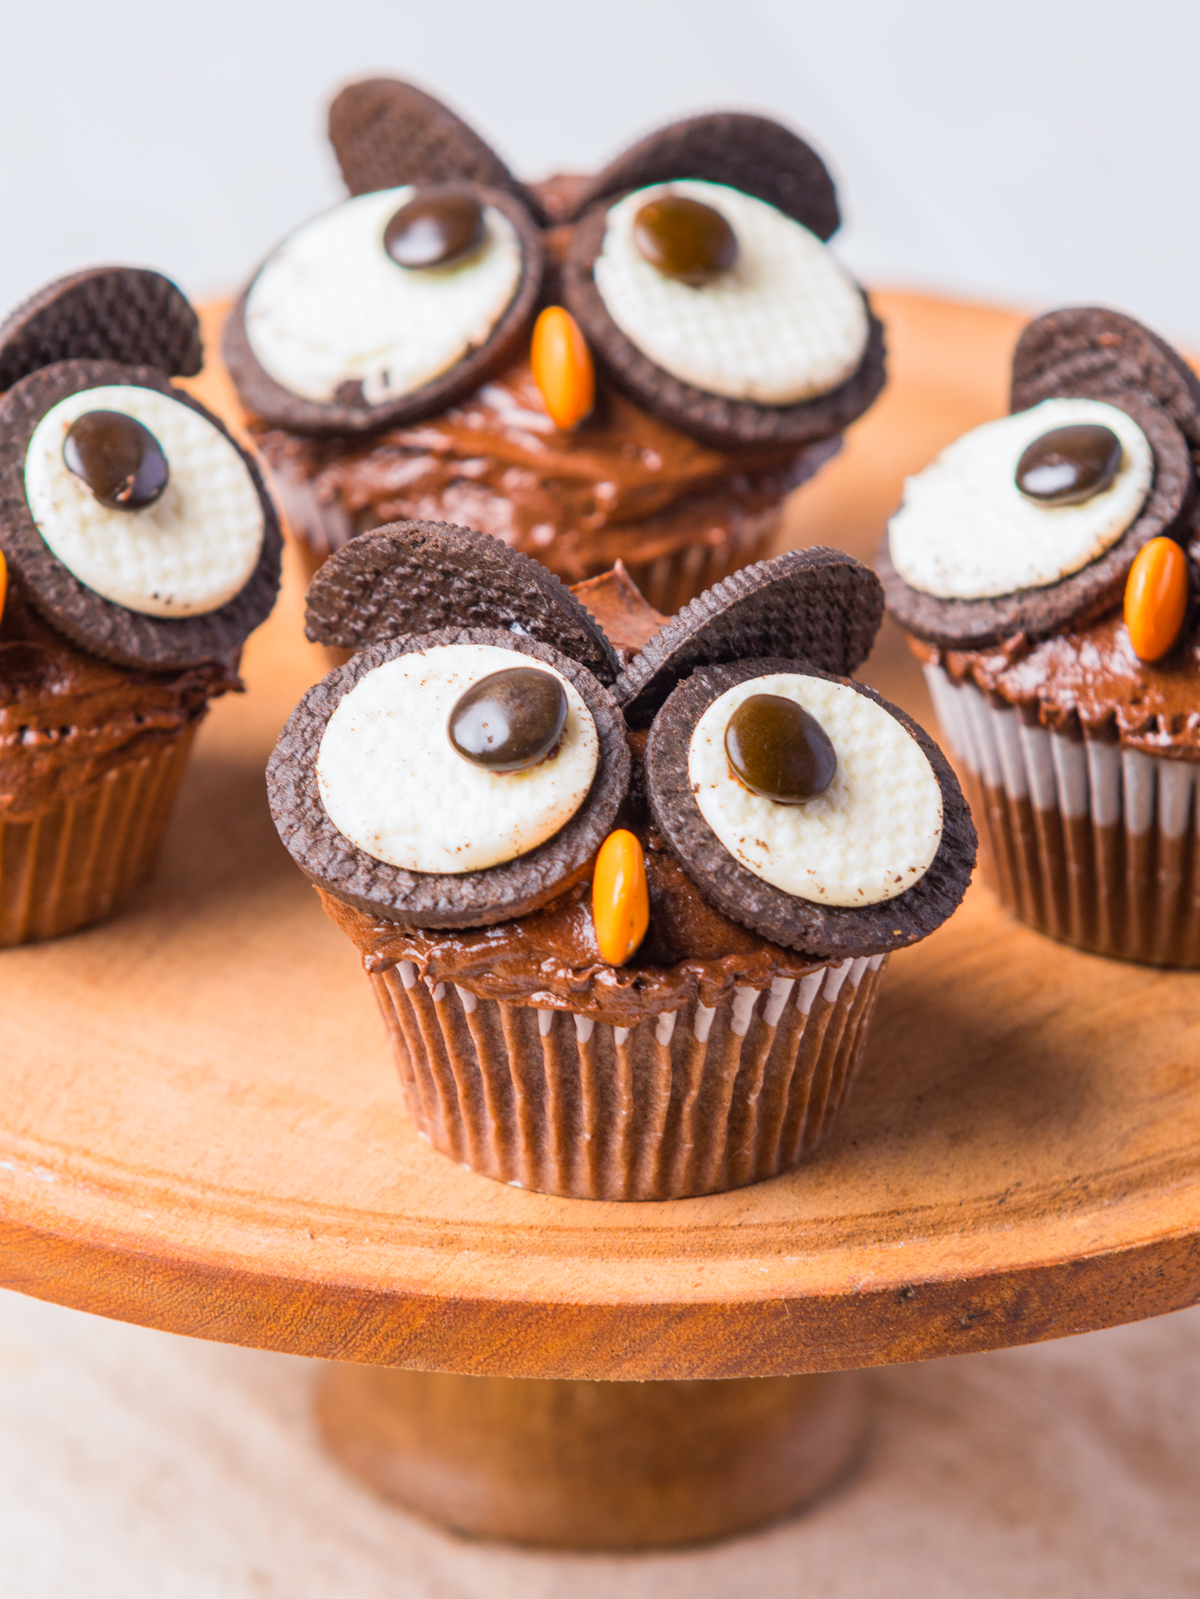 Magical Owl and Books Local Deerfield's Bakery Fantasy – Deerfields Bakery